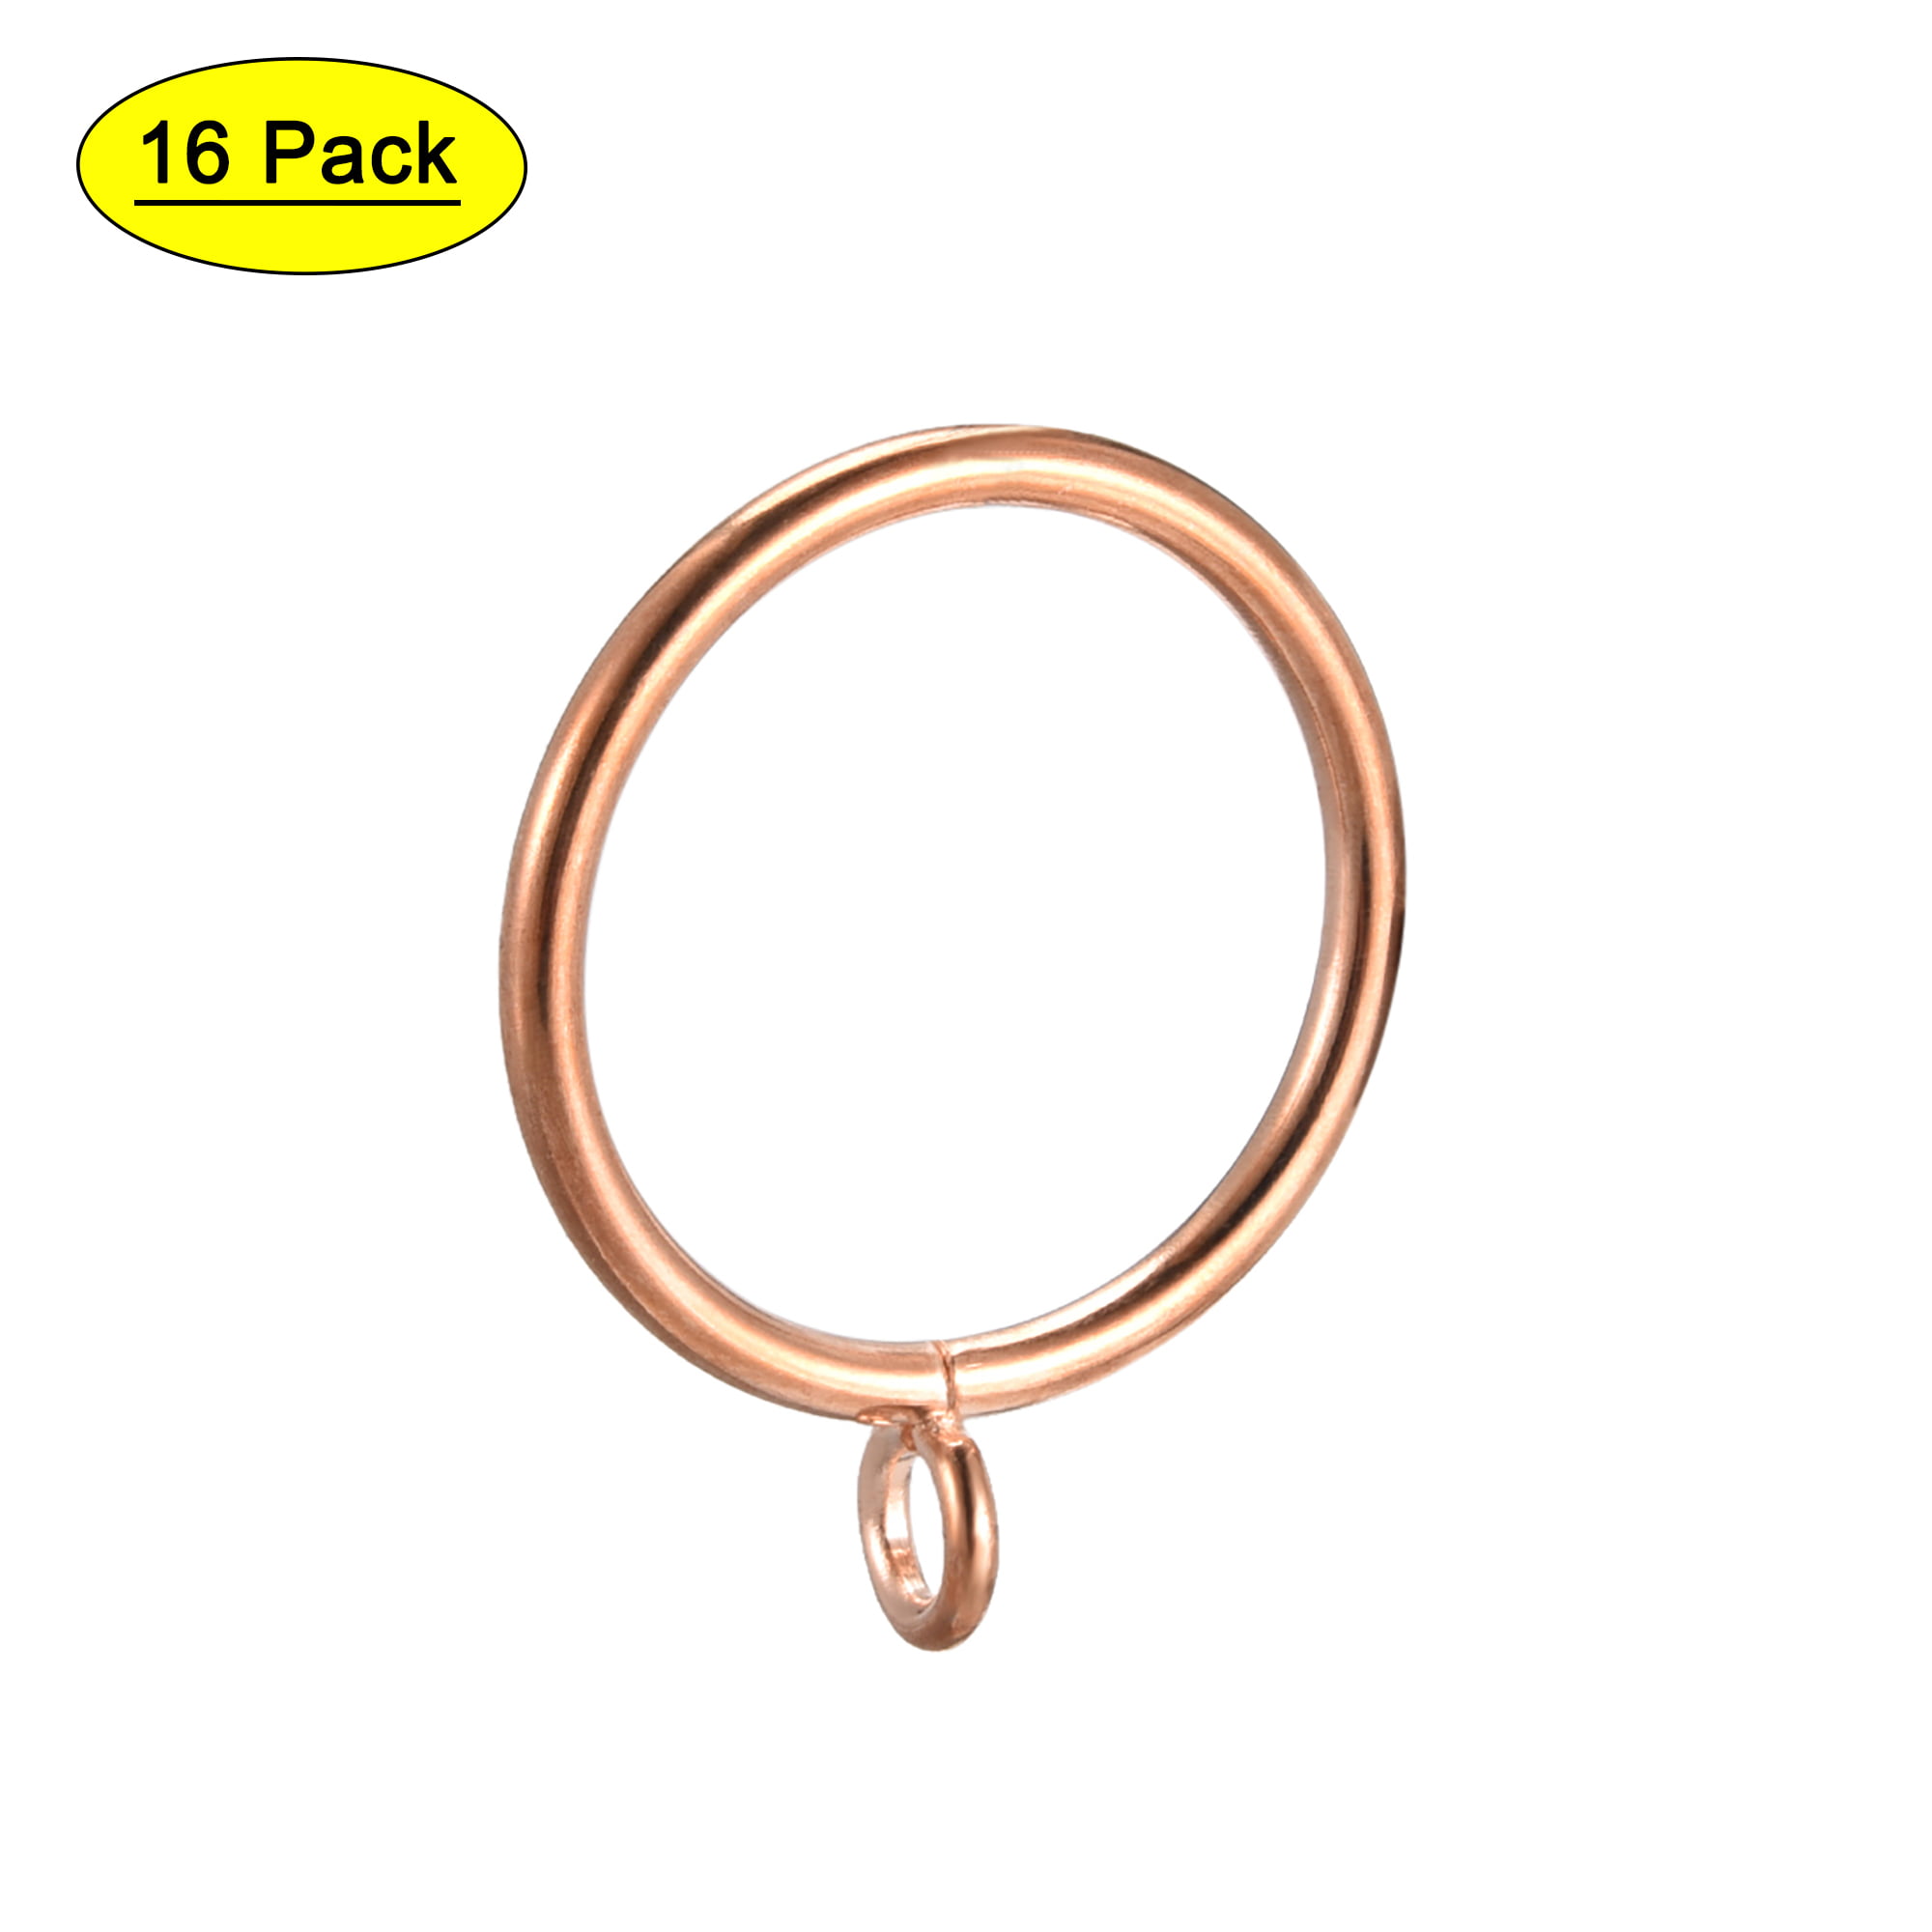 sizes 28mm rings for sizes 16-19mm Rods Use 20 Pack Metal Curtain Rings 